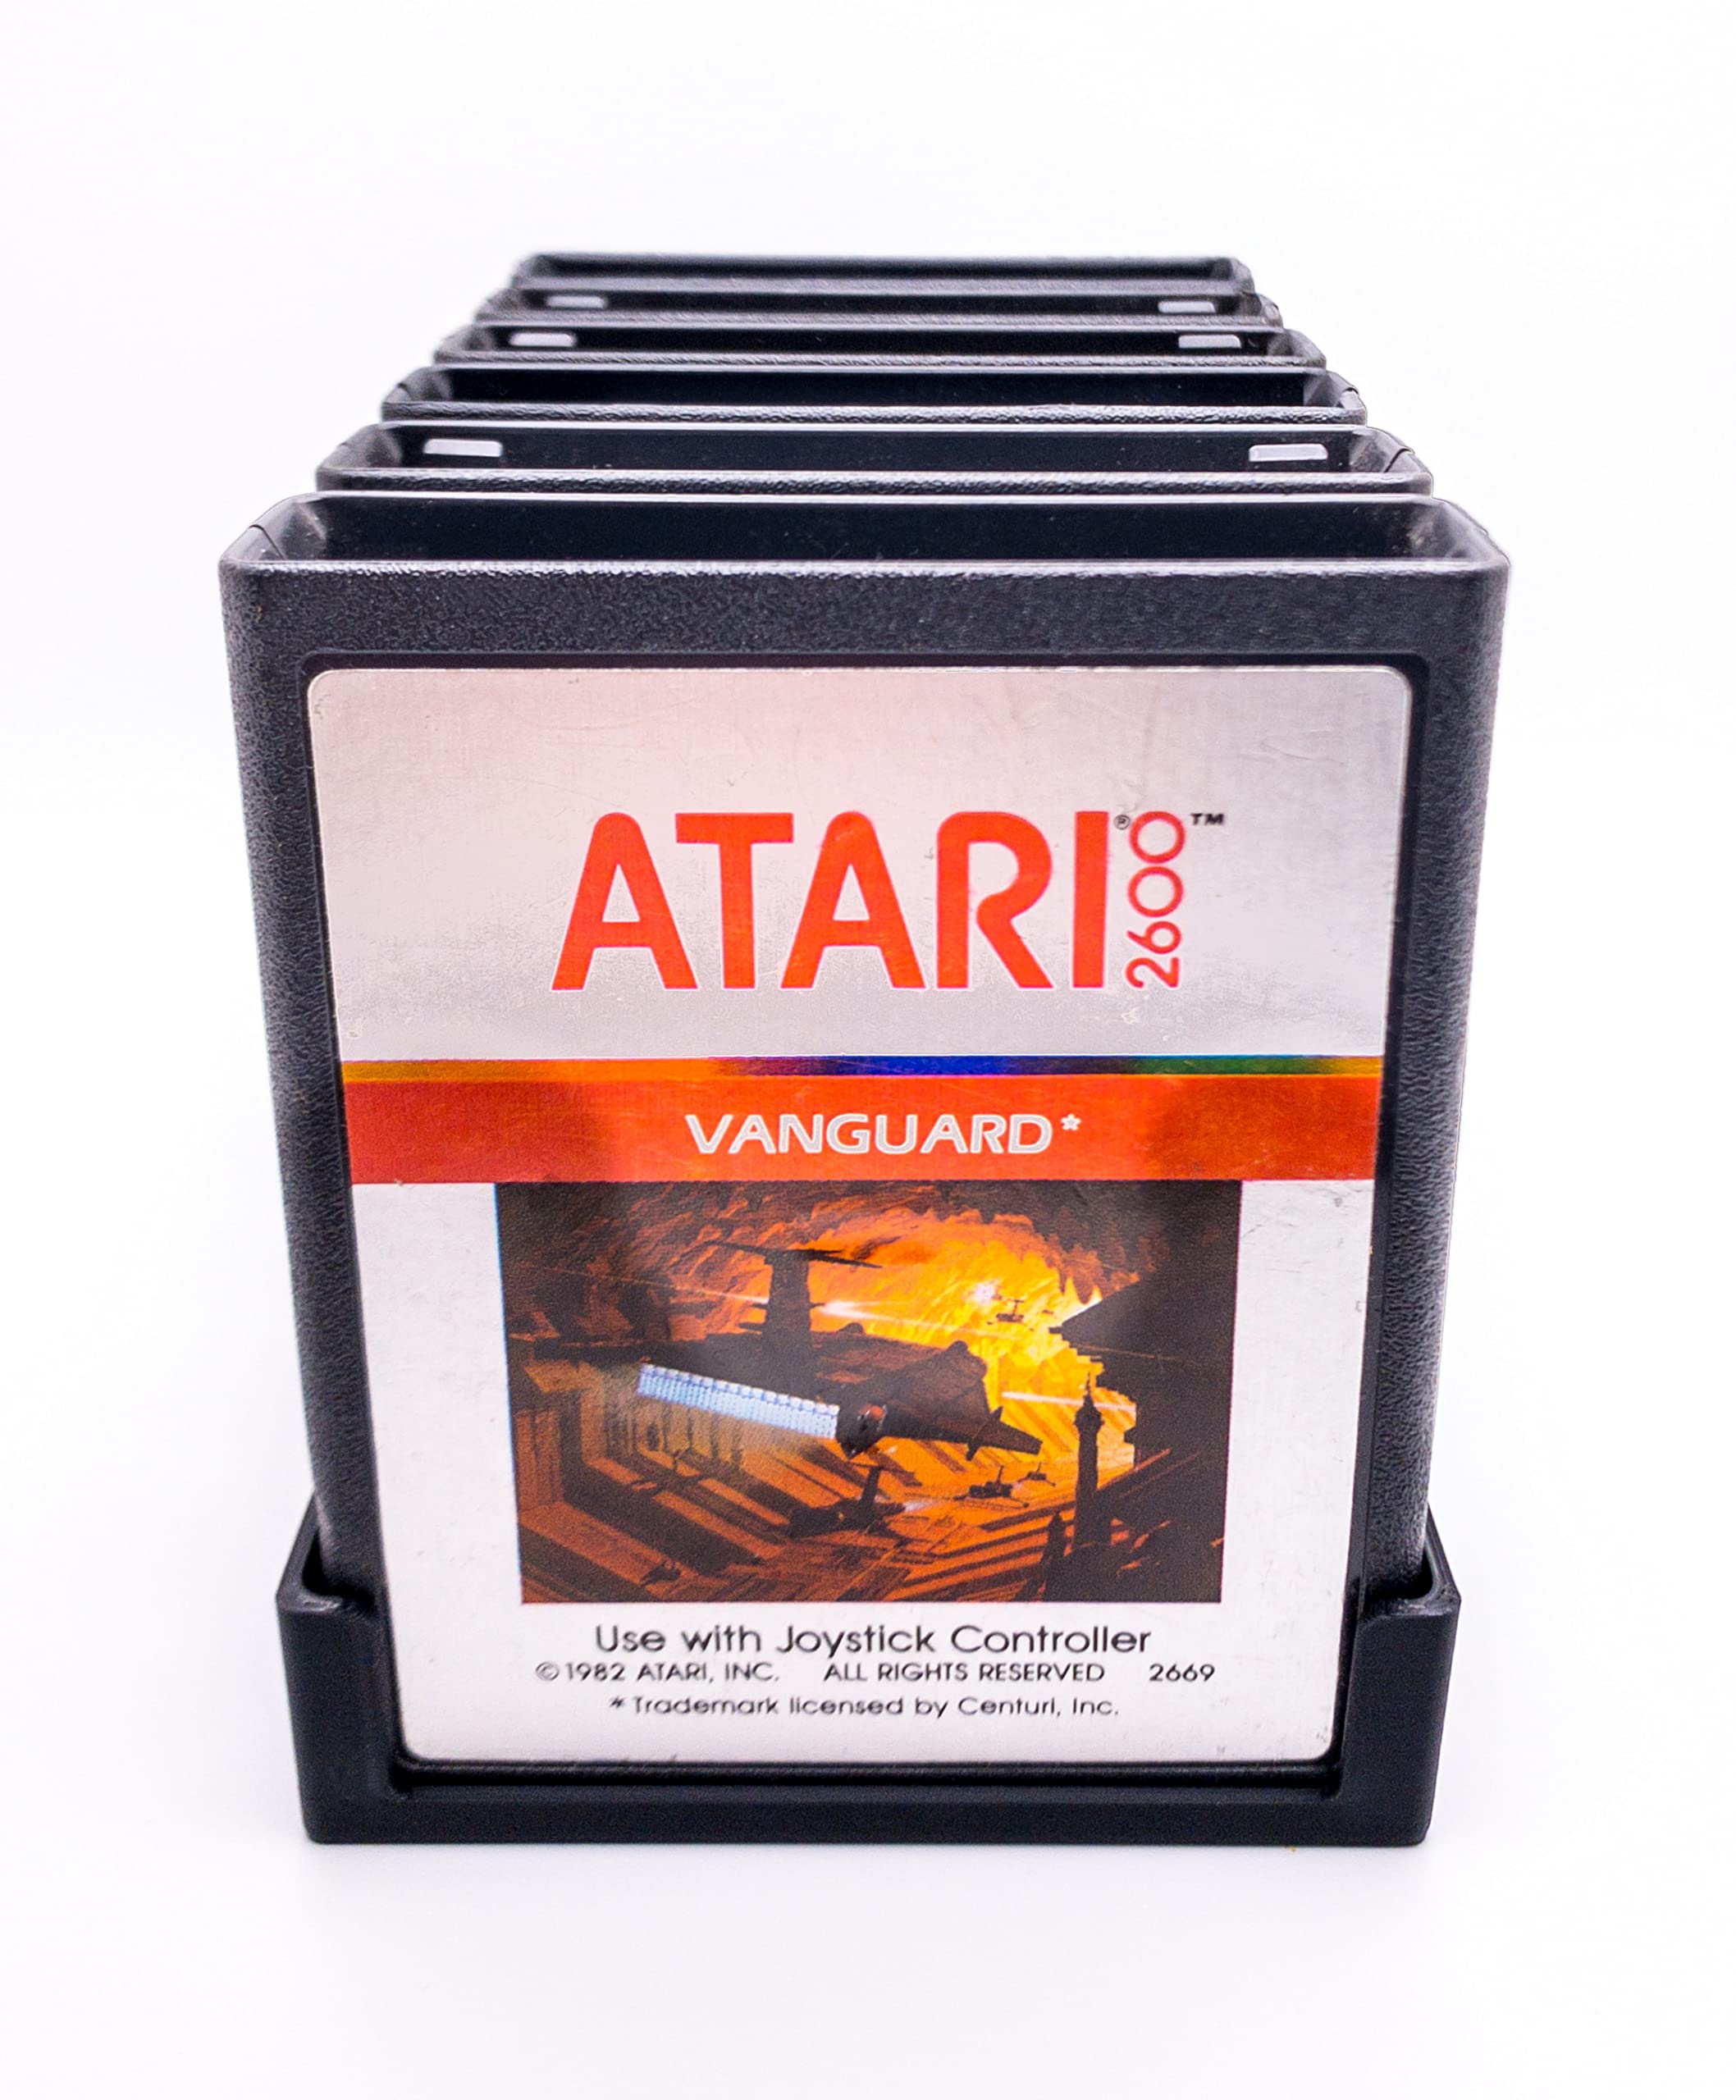 Game Cartridge Holder for Atari 2600 & 7800 - Tray Holds Up To 6 Games